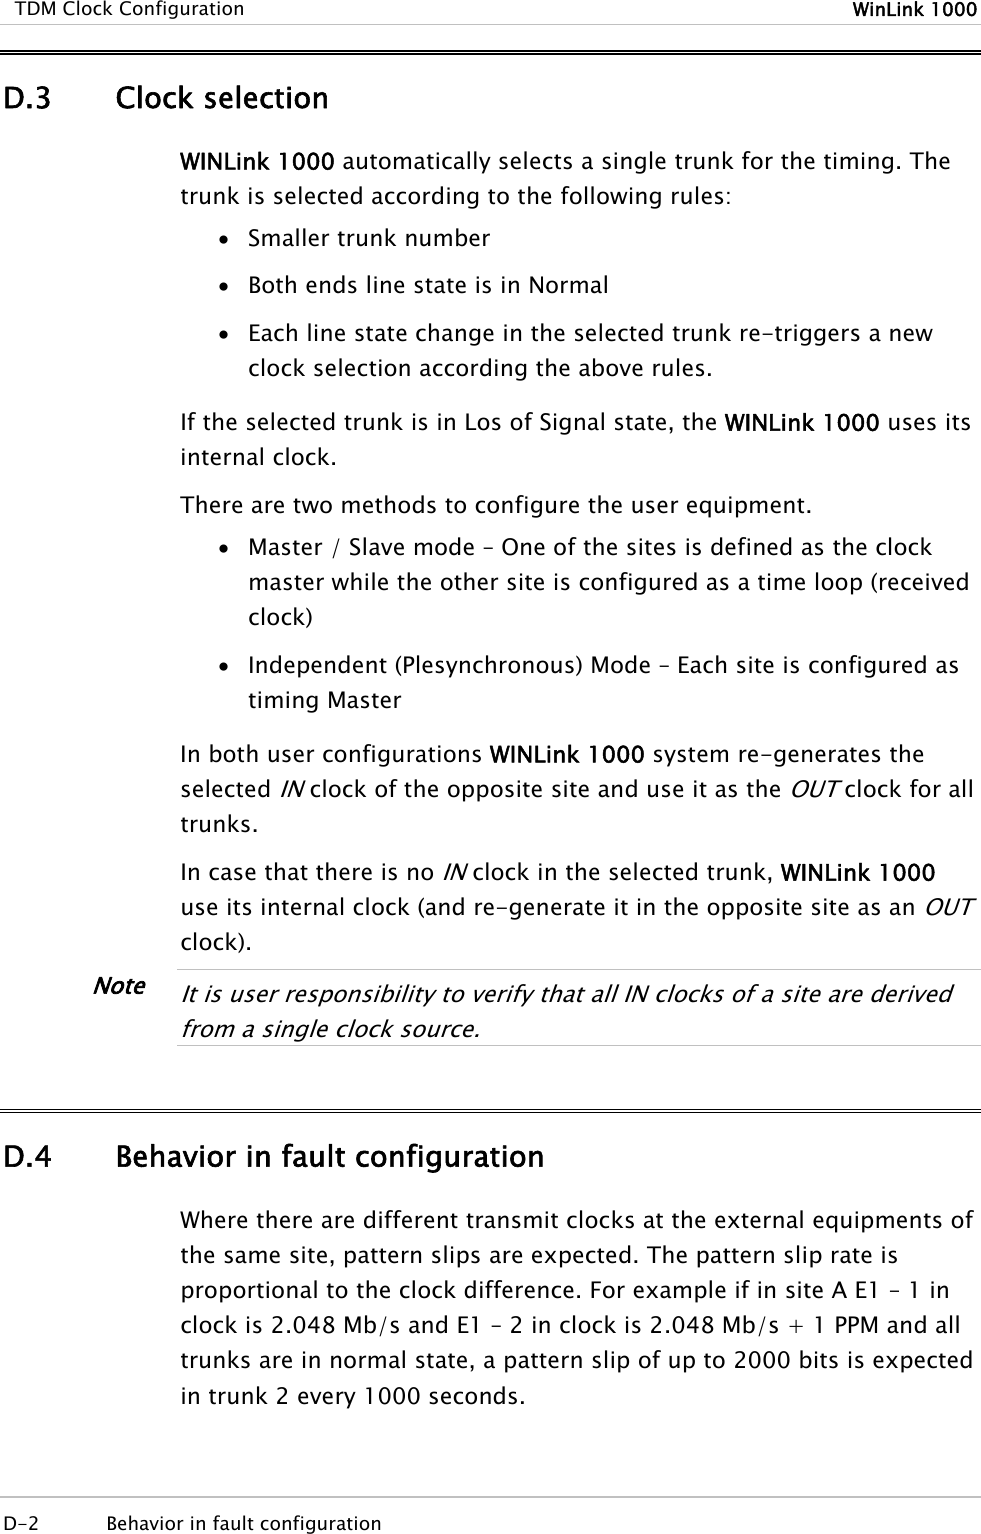   TDM Clock Configuration  WinLink 1000  D-2  Behavior in fault configuration   D.3 Clock selection WINLink 1000 automatically selects a single trunk for the timing. The trunk is selected according to the following rules: • Smaller trunk number • Both ends line state is in Normal • Each line state change in the selected trunk re-triggers a new clock selection according the above rules. If the selected trunk is in Los of Signal state, the WINLink 1000 uses its internal clock. There are two methods to configure the user equipment. • Master / Slave mode – One of the sites is defined as the clock master while the other site is configured as a time loop (received clock) • Independent (Plesynchronous) Mode – Each site is configured as timing Master In both user configurations WINLink 1000 system re-generates the selected IN clock of the opposite site and use it as the OUT clock for all trunks.  In case that there is no IN clock in the selected trunk, WINLink 1000 use its internal clock (and re-generate it in the opposite site as an OUT clock).  It is user responsibility to verify that all IN clocks of a site are derived from a single clock source.  D.4 Behavior in fault configuration Where there are different transmit clocks at the external equipments of the same site, pattern slips are expected. The pattern slip rate is proportional to the clock difference. For example if in site A E1 – 1 in clock is 2.048 Mb/s and E1 – 2 in clock is 2.048 Mb/s + 1 PPM and all trunks are in normal state, a pattern slip of up to 2000 bits is expected in trunk 2 every 1000 seconds. Note 